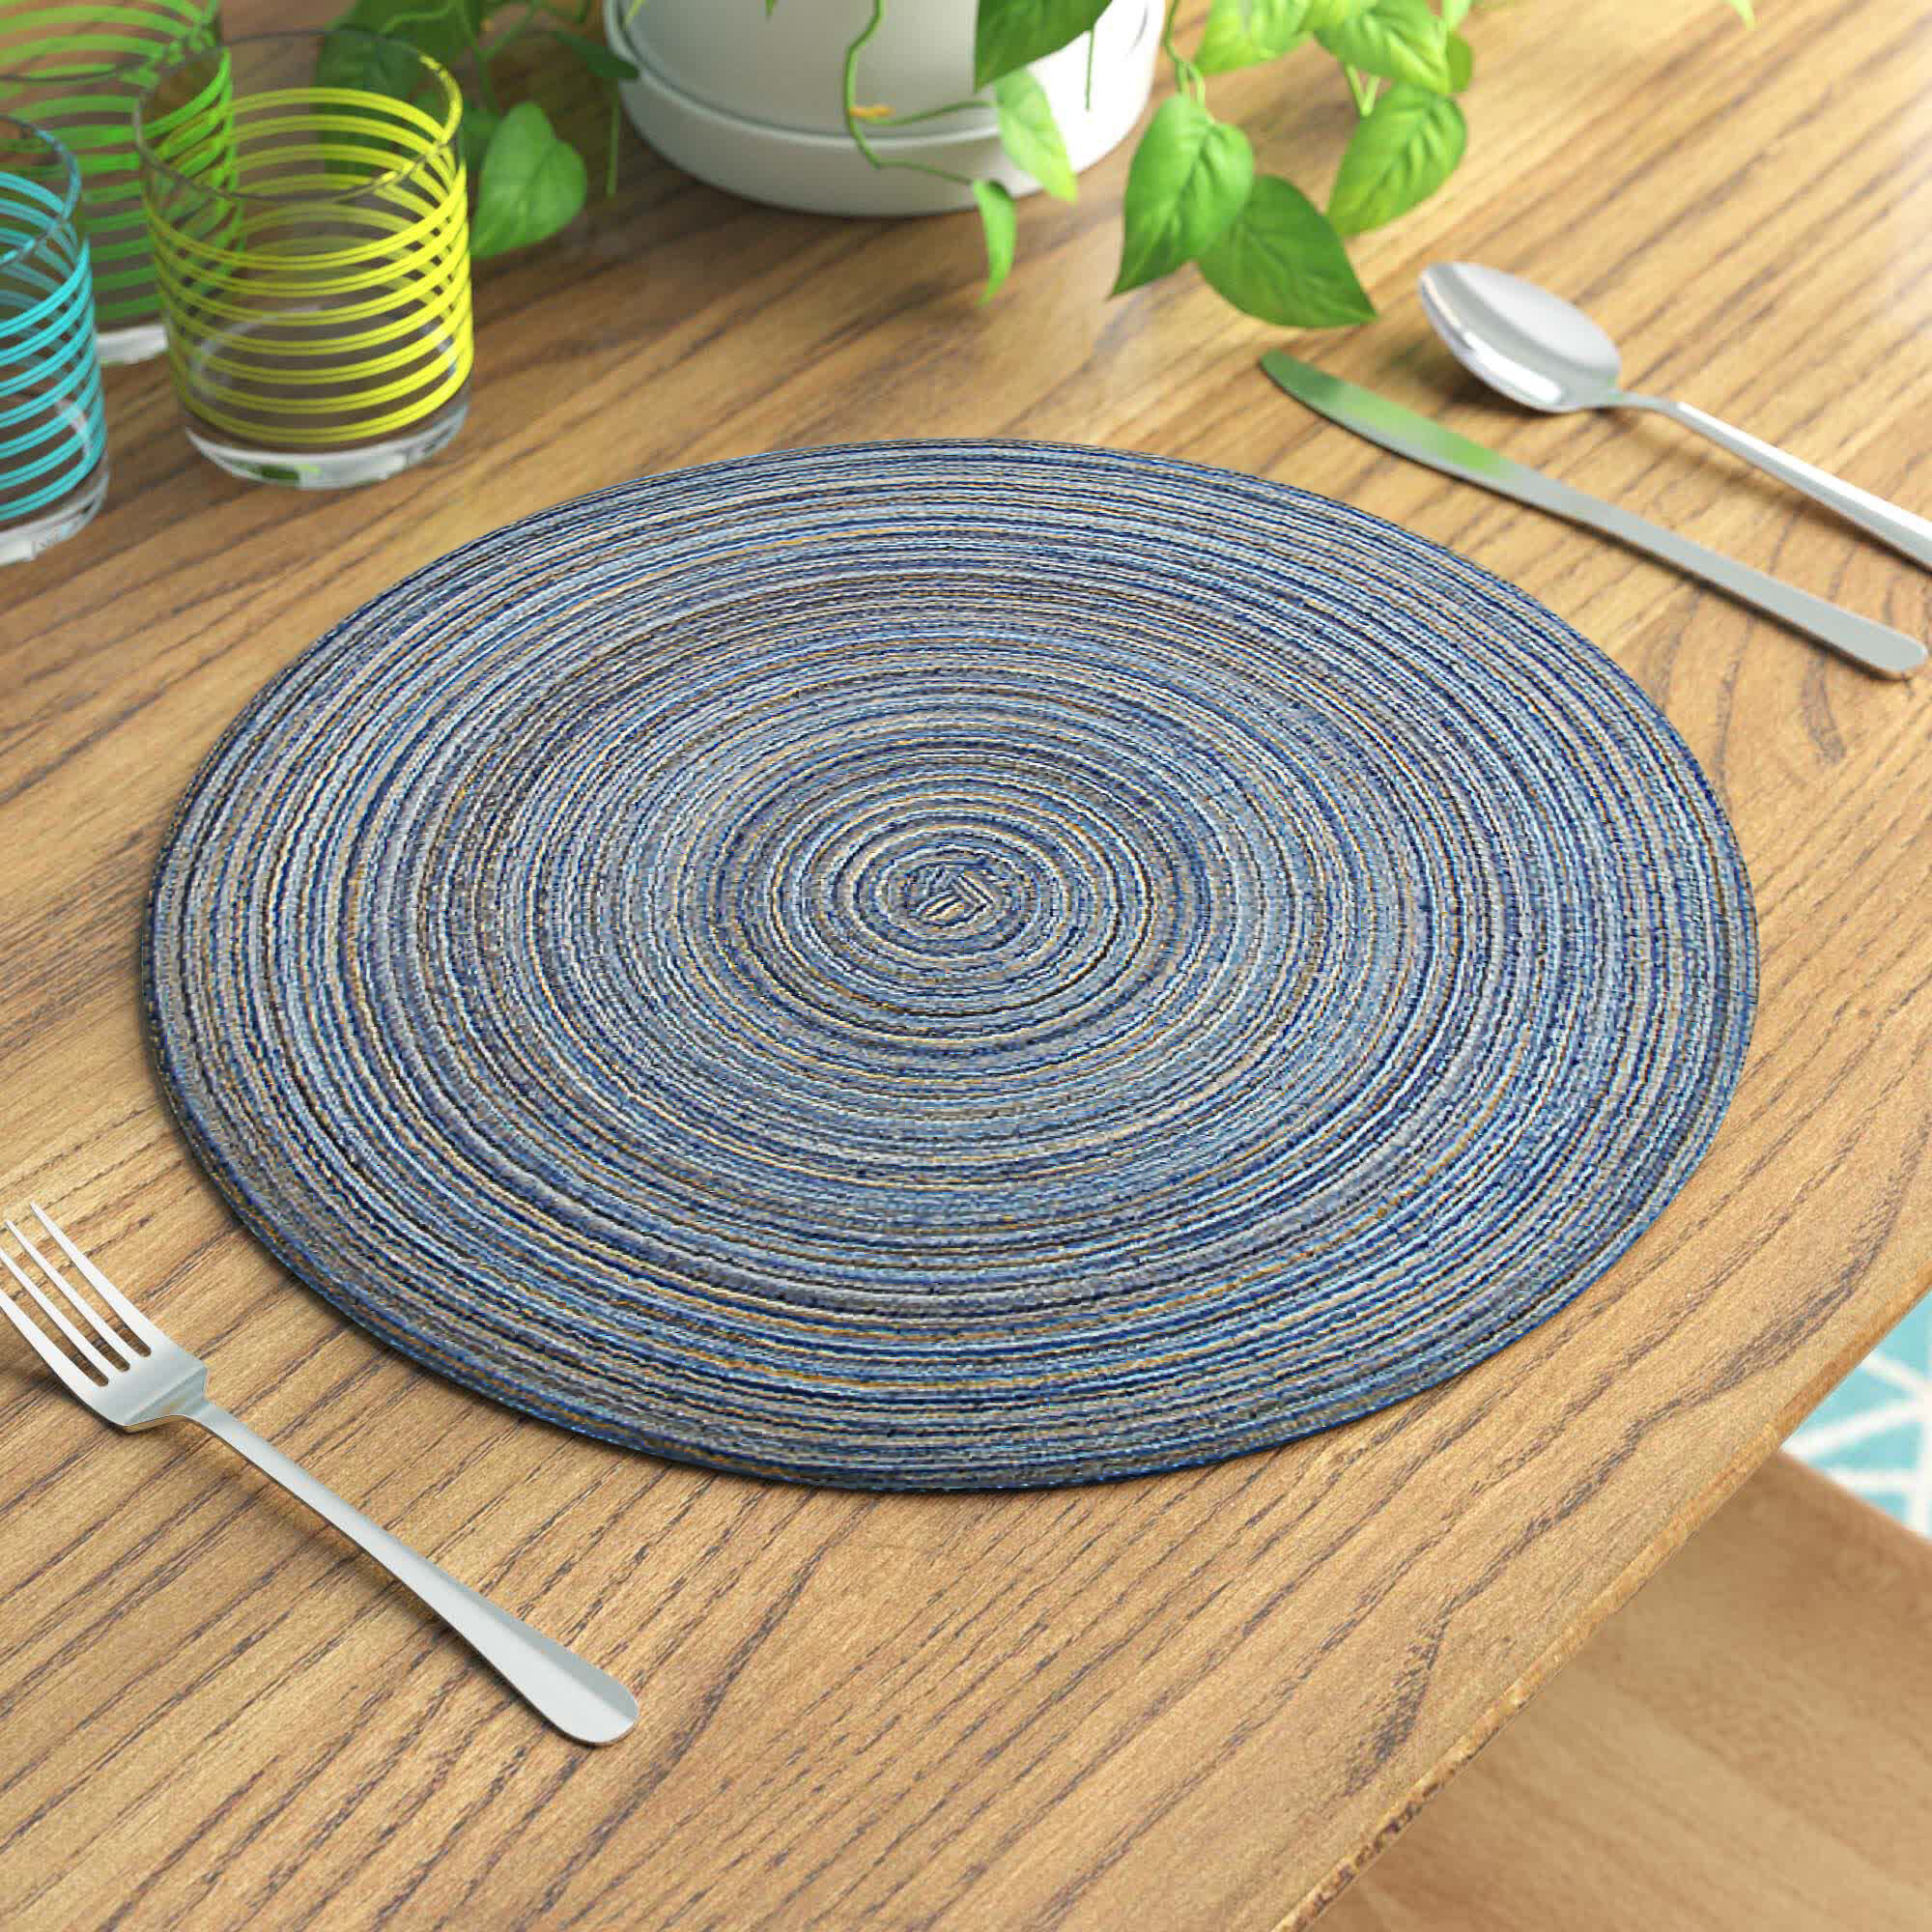 Set of 2 Dinner Cloth Children Mats Grey Classical Simple Basic Table Placemats 